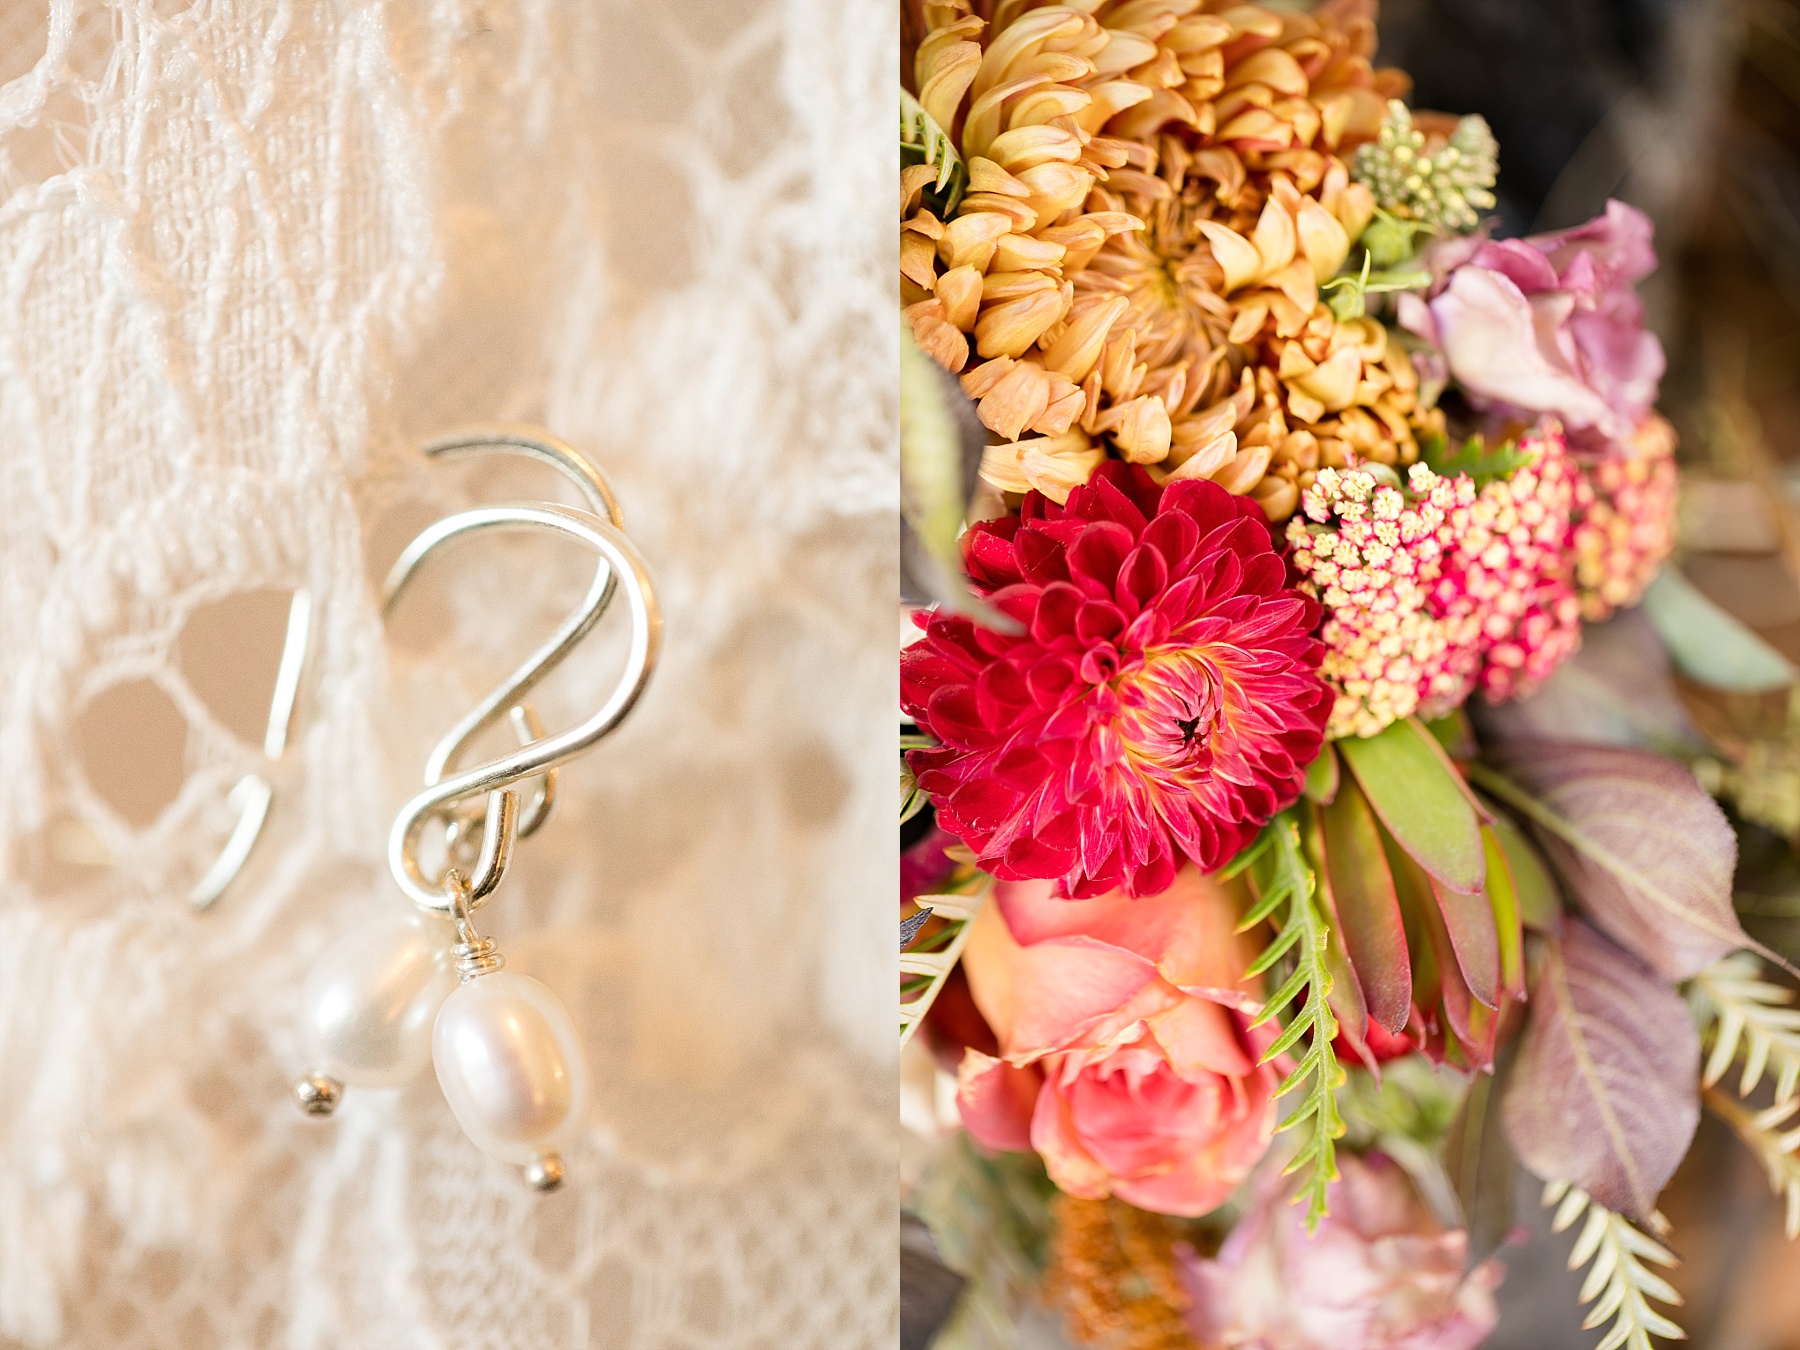 brides earrings and bouquet